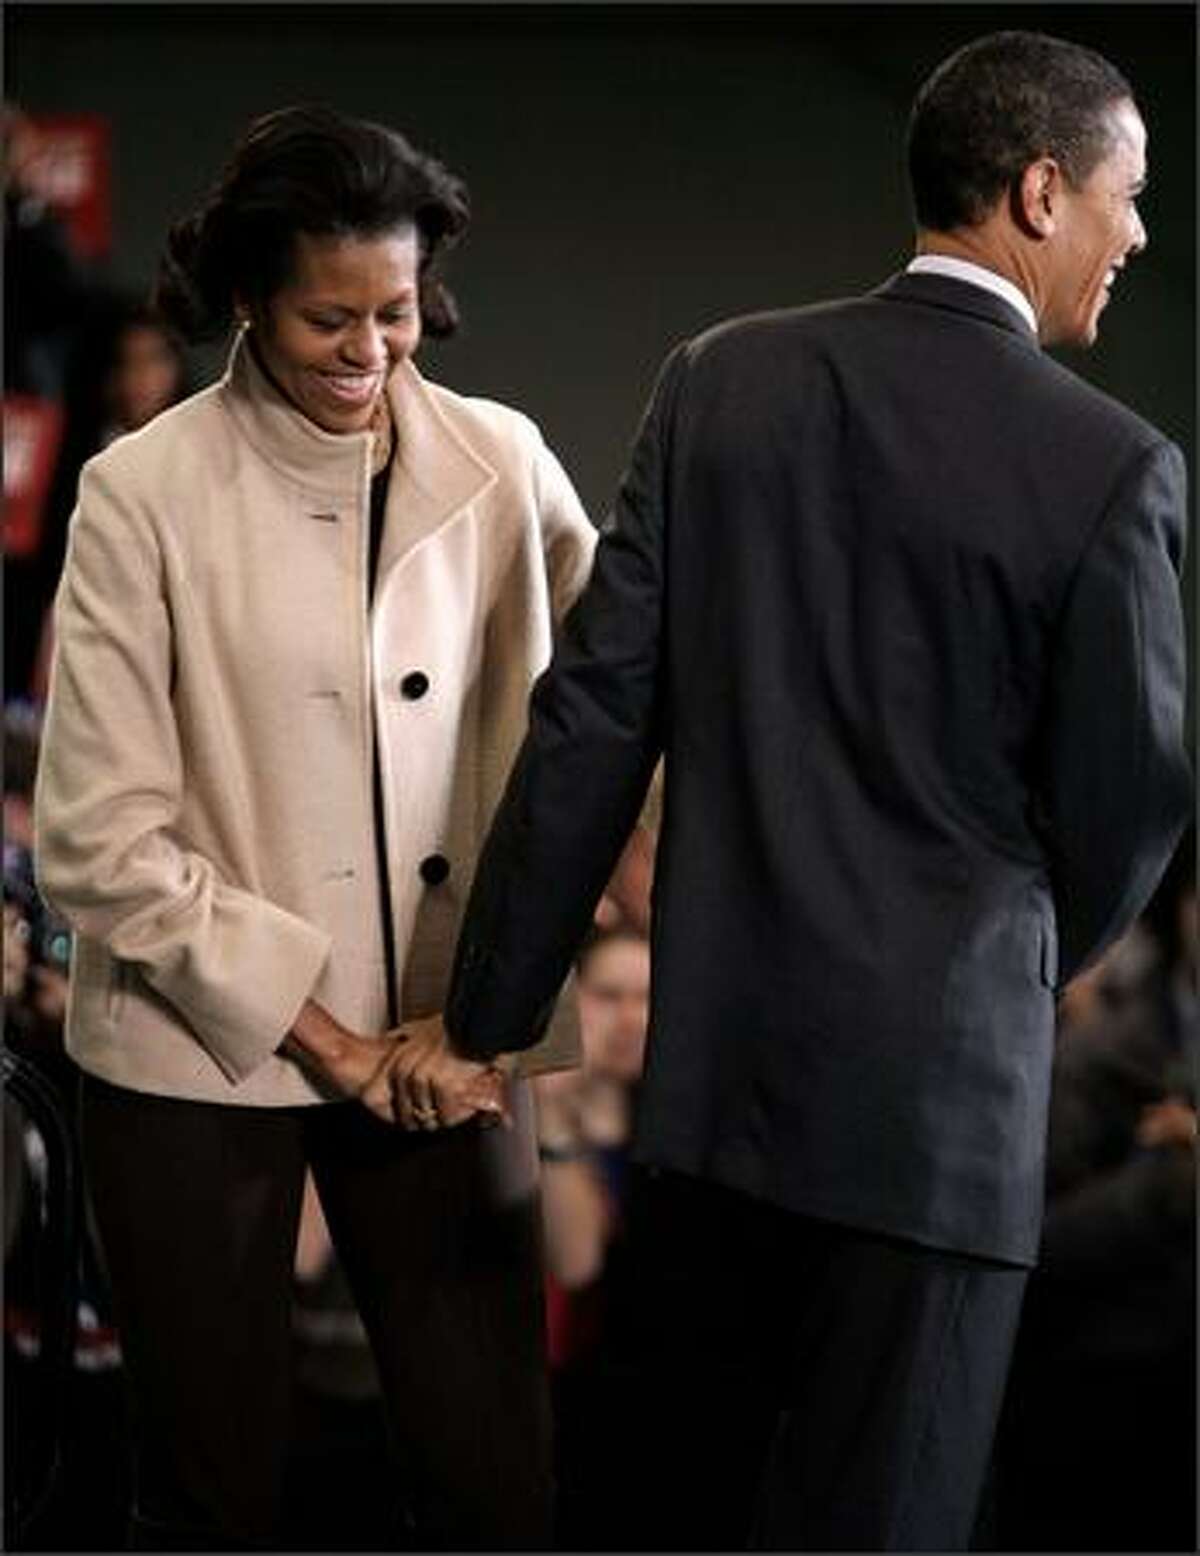 Democratic presidential hopeful Sen. Barack Obama (D-IL) (R) holds hands with his wife Michelle Obama during a rally at the athletics facility at Dartmouth College Jan. 8, 2008 in Hanover, New Hampshire. Polls show Obama leading Sen. Hillary Clinton (D-NY) moving into today's New Hampshire primary.